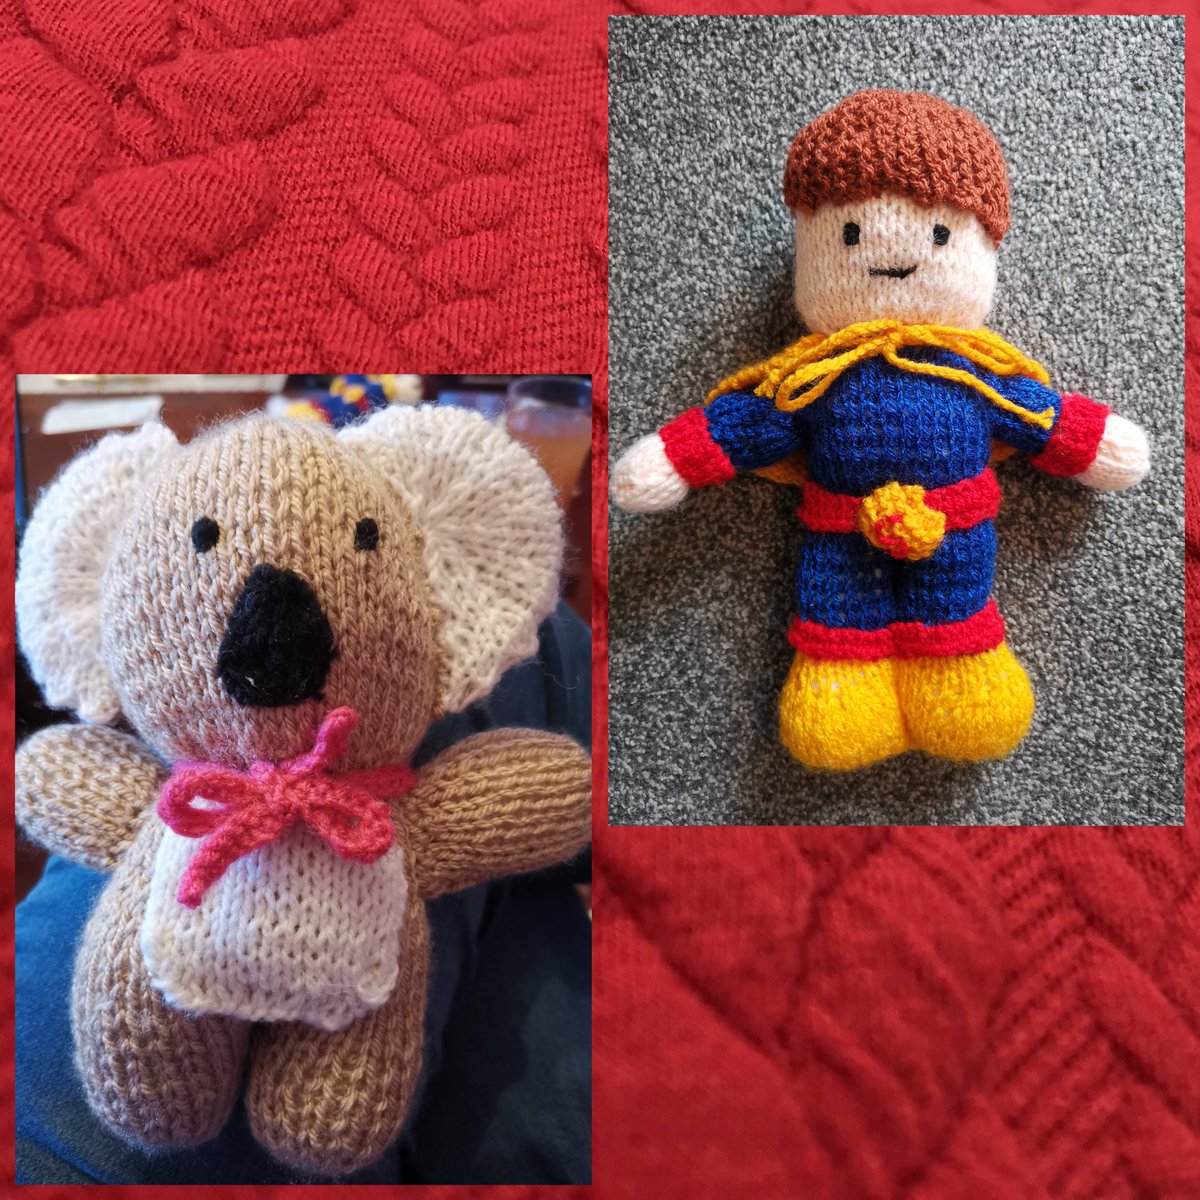 A bit of knitting this week for the shoeboxes. Koala and Superkid. #jeangreenhowe #OperationChristmasChild